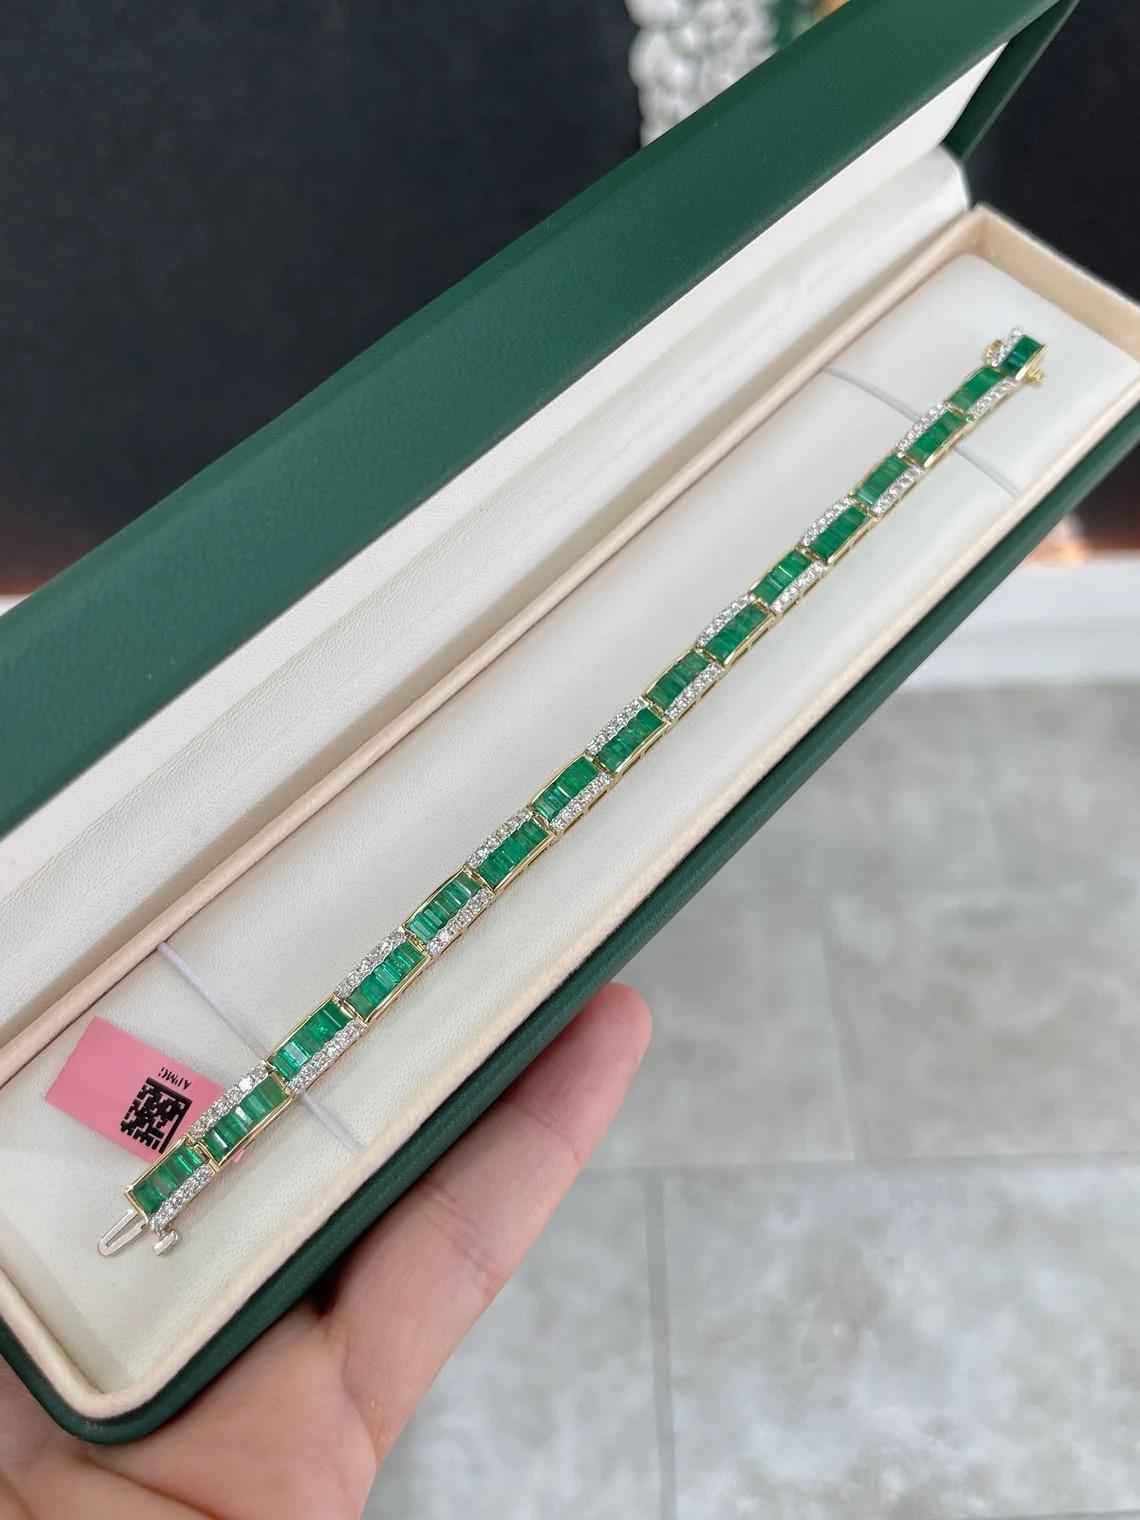 A remarkable emerald and diamond bracelet. This stunning piece features nine carats of natural baguette-cut emeralds that showcase a lovely lush green color with good clarity and even better luster. Petite brilliant round cut diamonds accent each